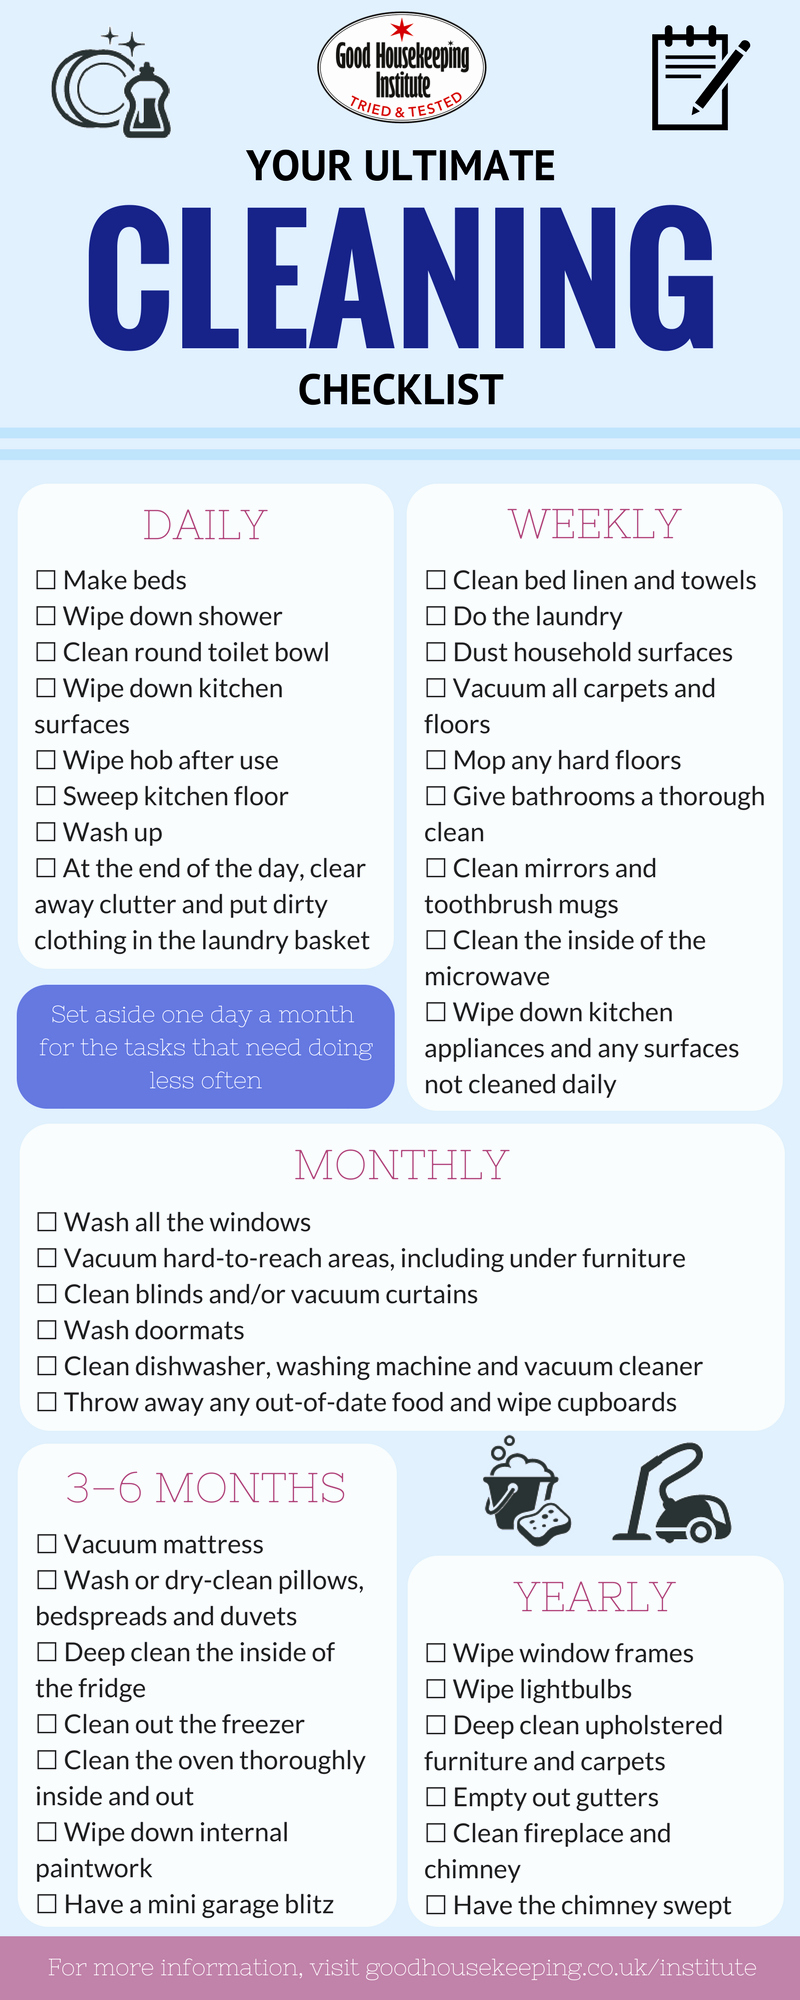 Deep Cleaning Checklist for Housekeeper Unique Ghi Cleaning Routine Checklist What to Do when Good